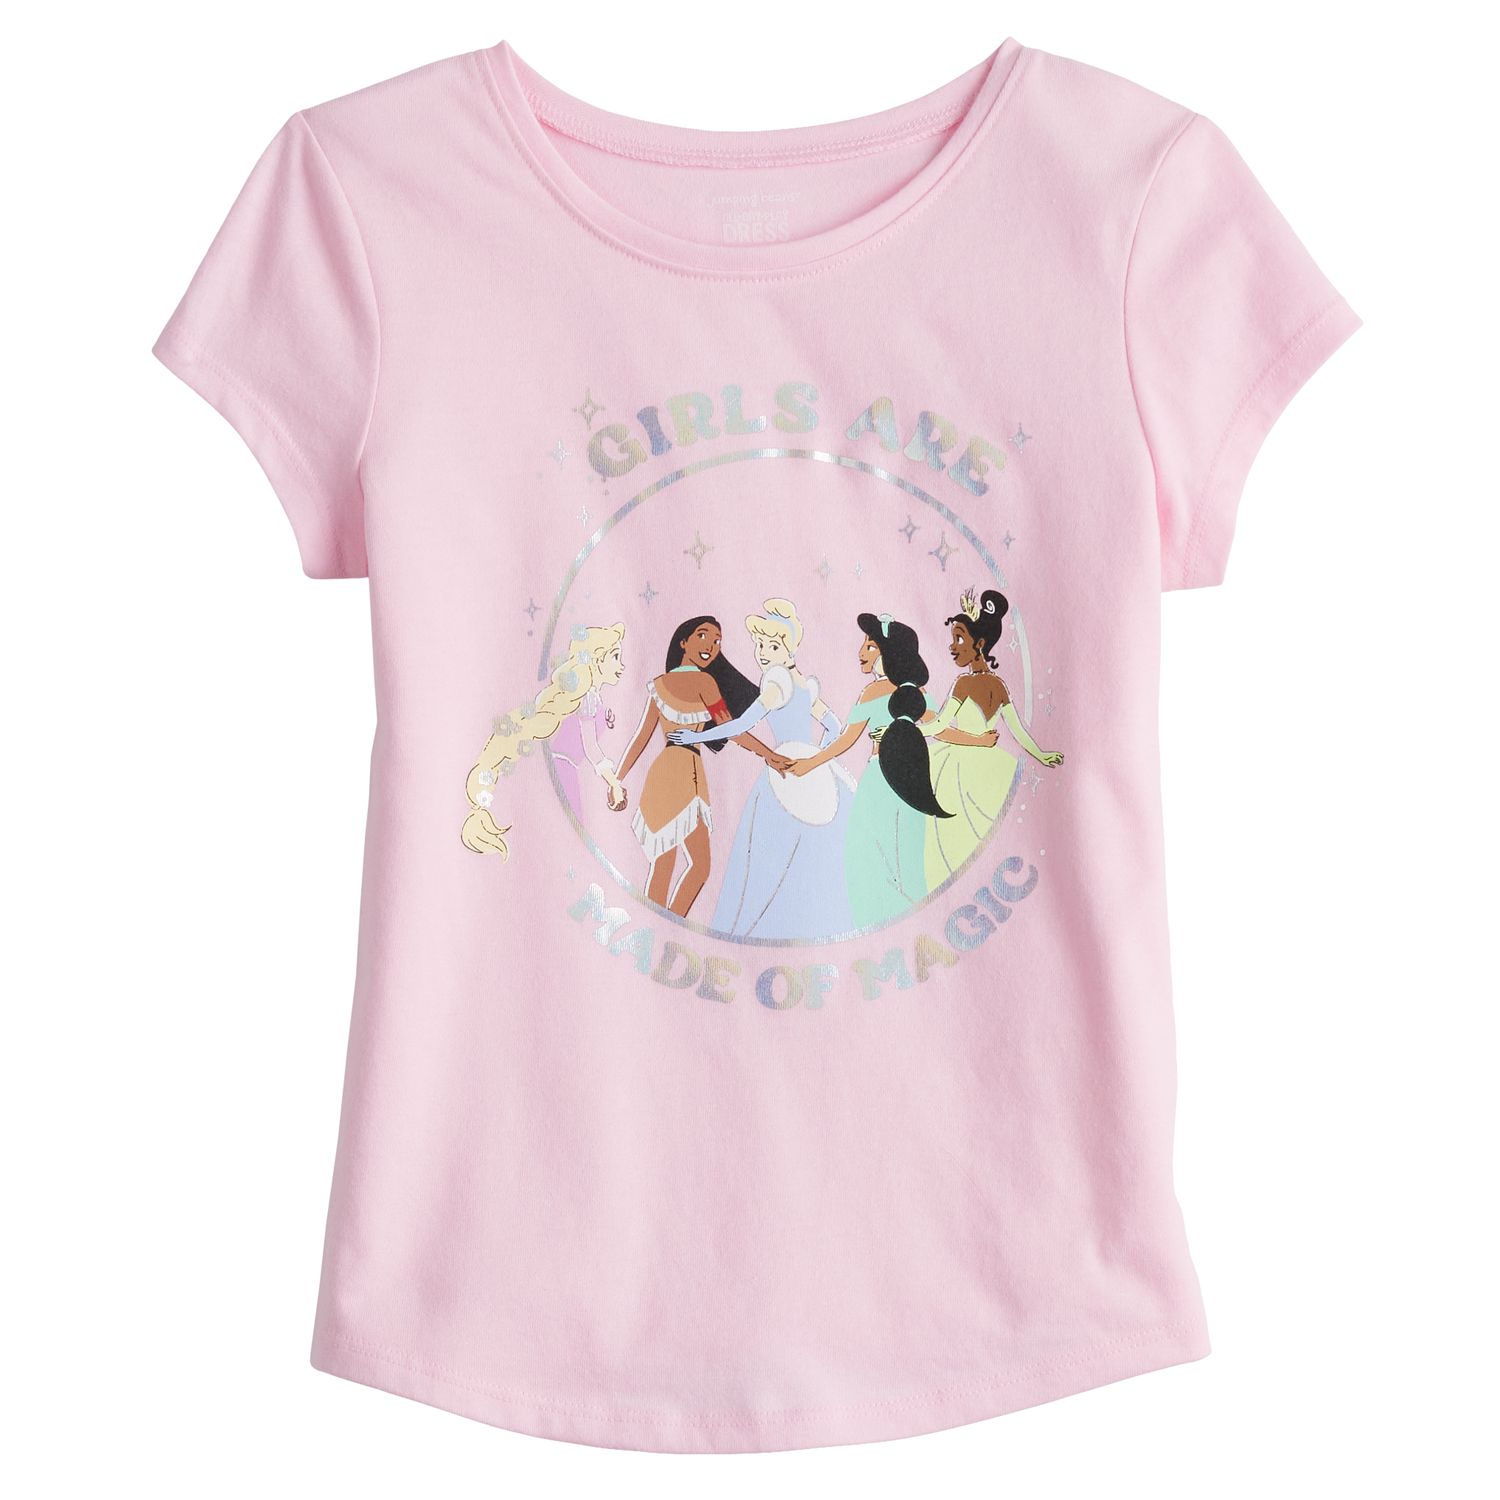 Image for Disney/Jumping Beans Disney's Princess Girls 4-12 Graphic Tee by Jumping Beans® at Kohl's.